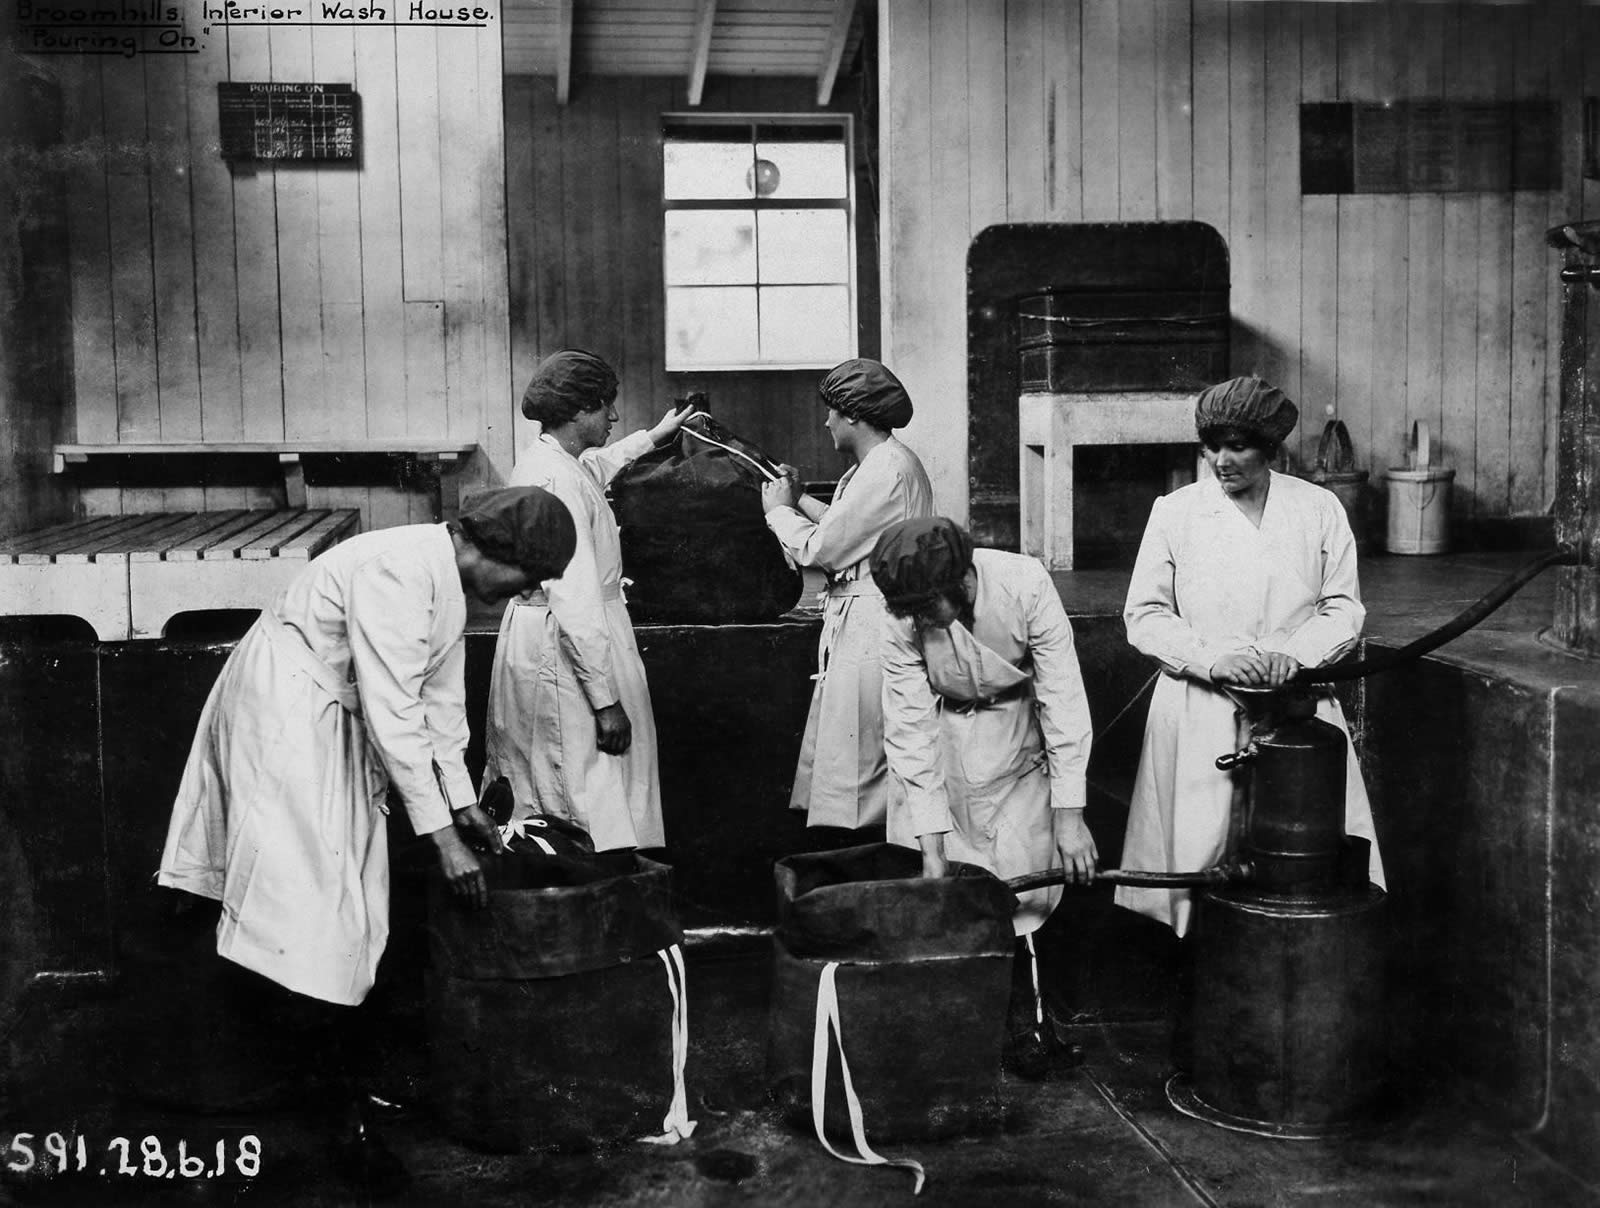 Image of five women working in a wash house